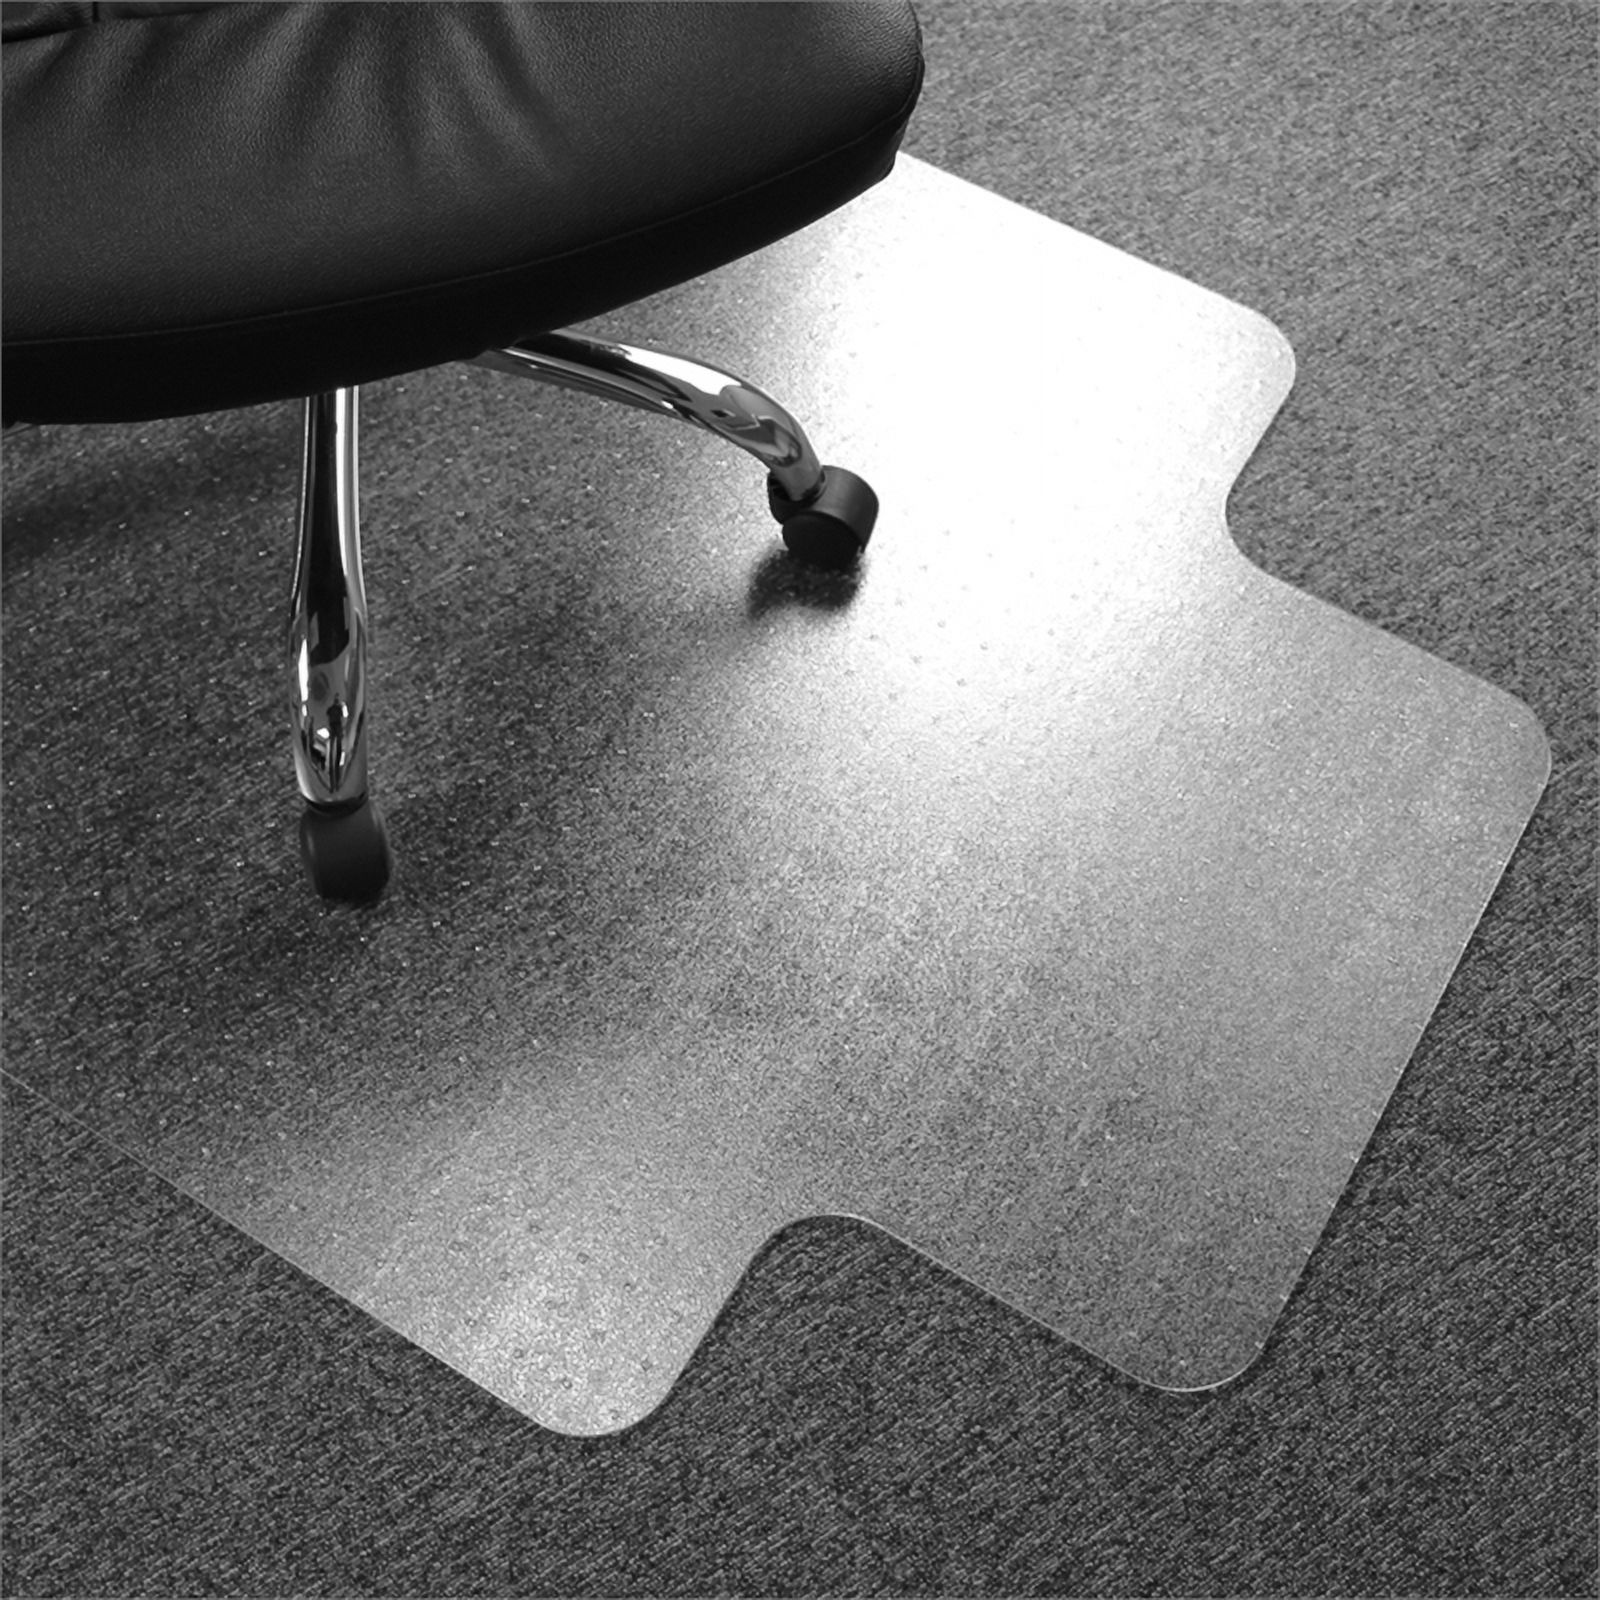 Advantagemat® Vinyl Lipped Chair Mat for Carpets up to 1/4" - 36" x 48" - image 2 of 2